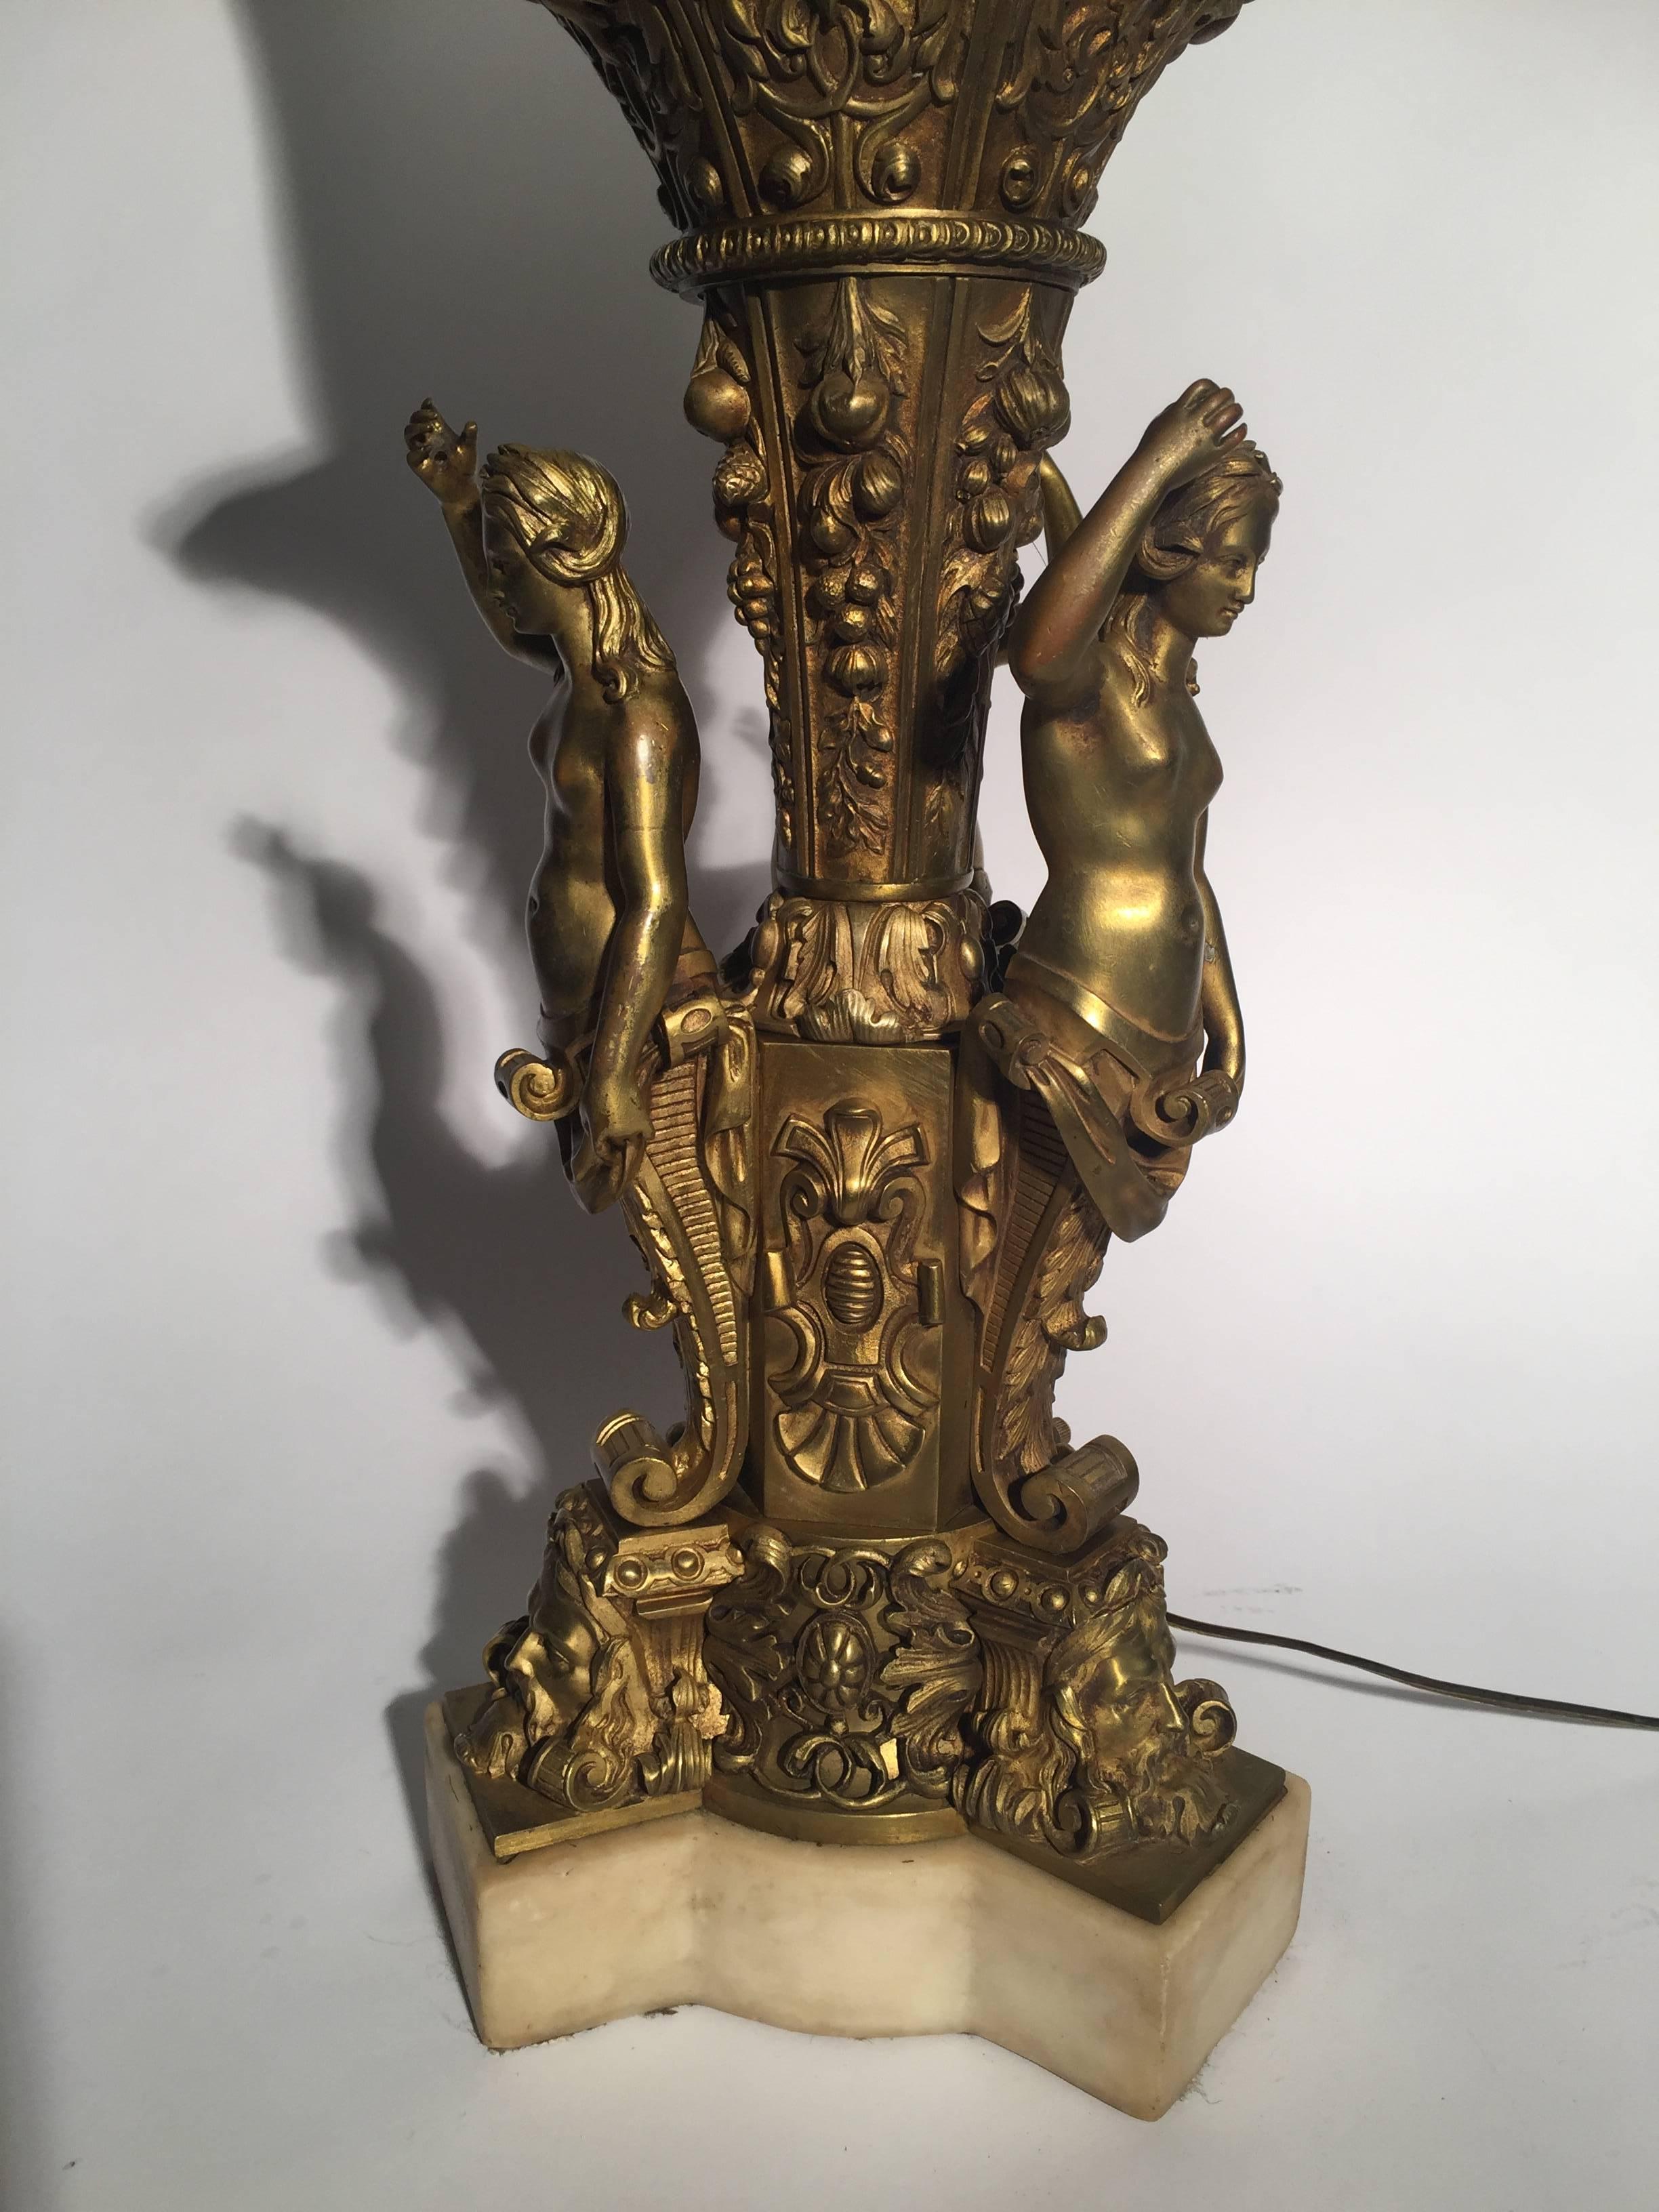 Exceptional figural gilt bronze lamps, very good original patina, circa 1890s.
Impressive in any room and setting.